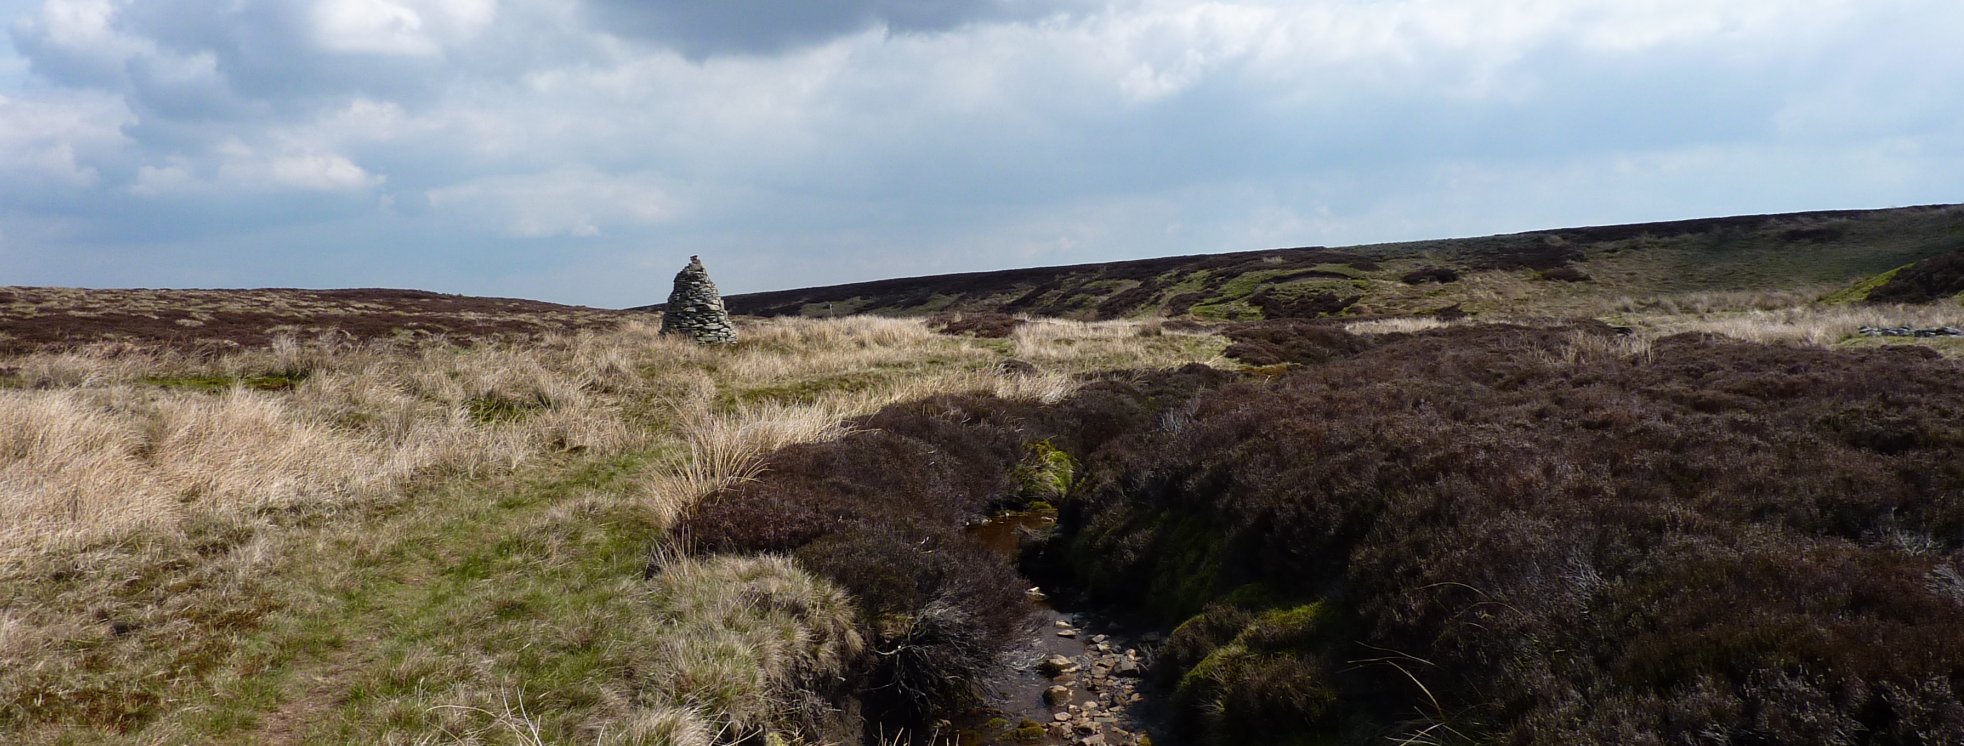 Views of Sleightholme Moor - a great place, unless it's rained in the past 3 months